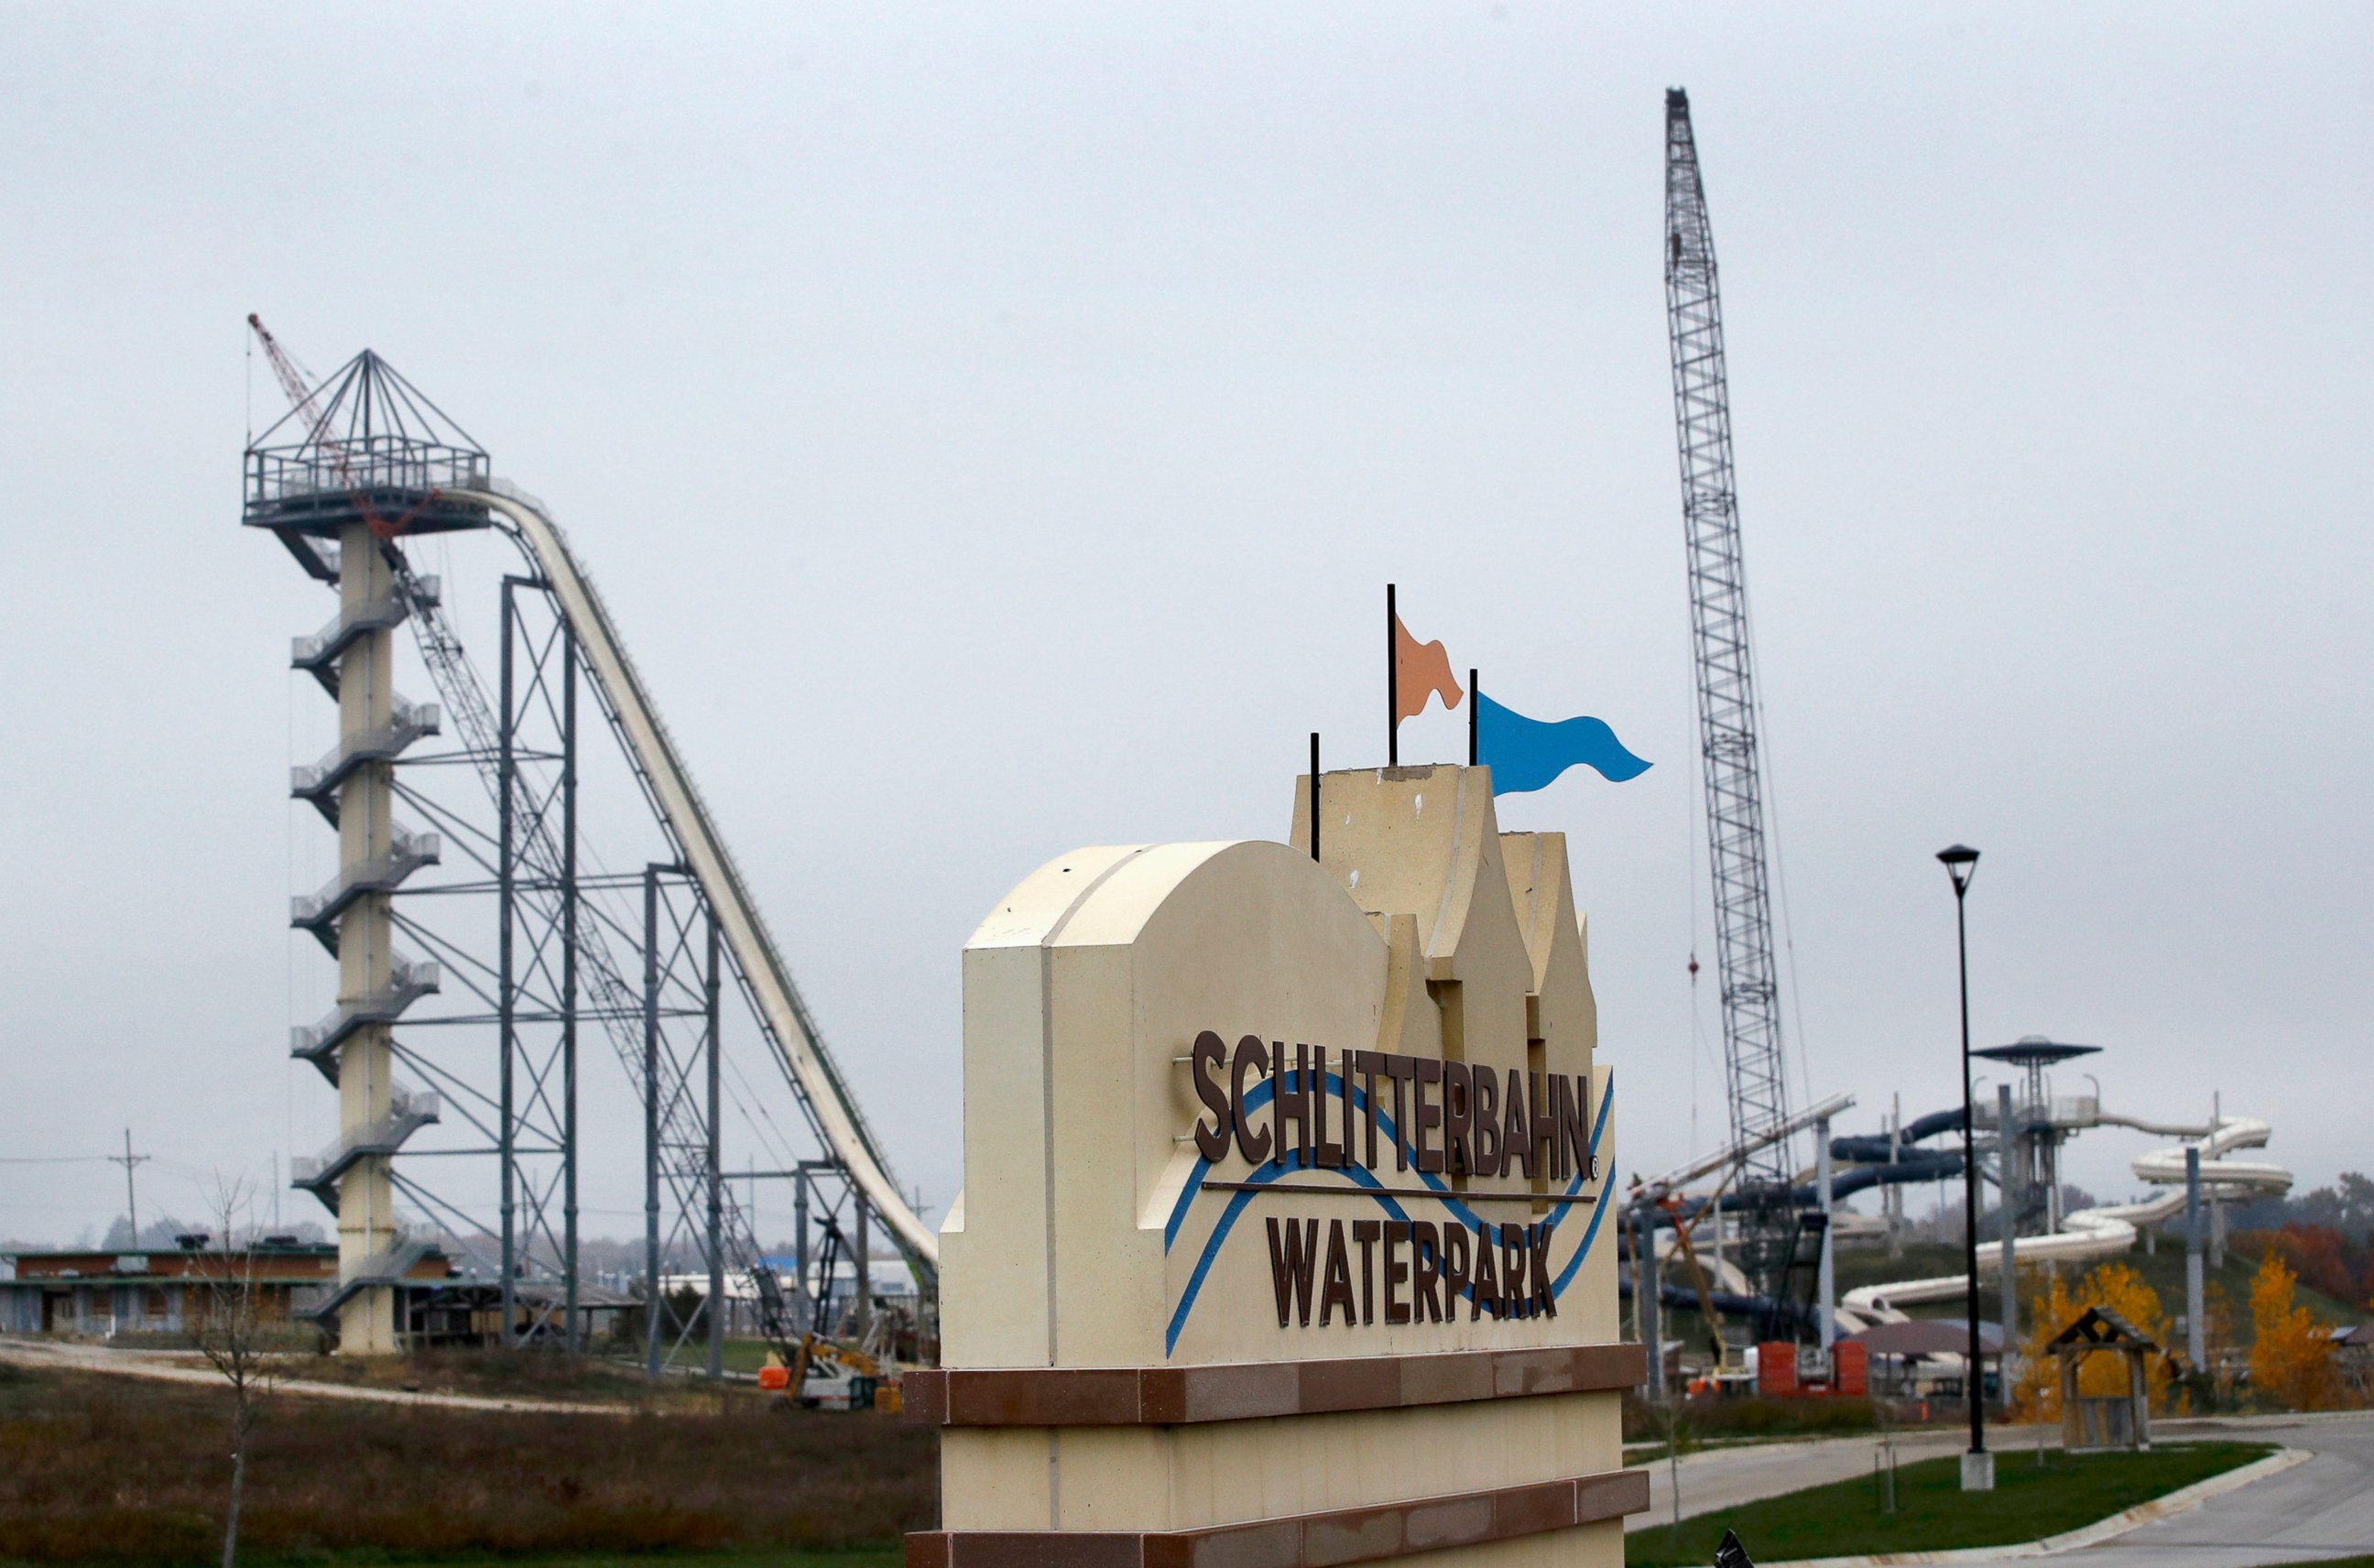 PHOTO: In this Oct. 30, 2018, file photo, crews dismantle the Verruckt waterslide at the Schlitterbahn water park in Kansas City, Kan.